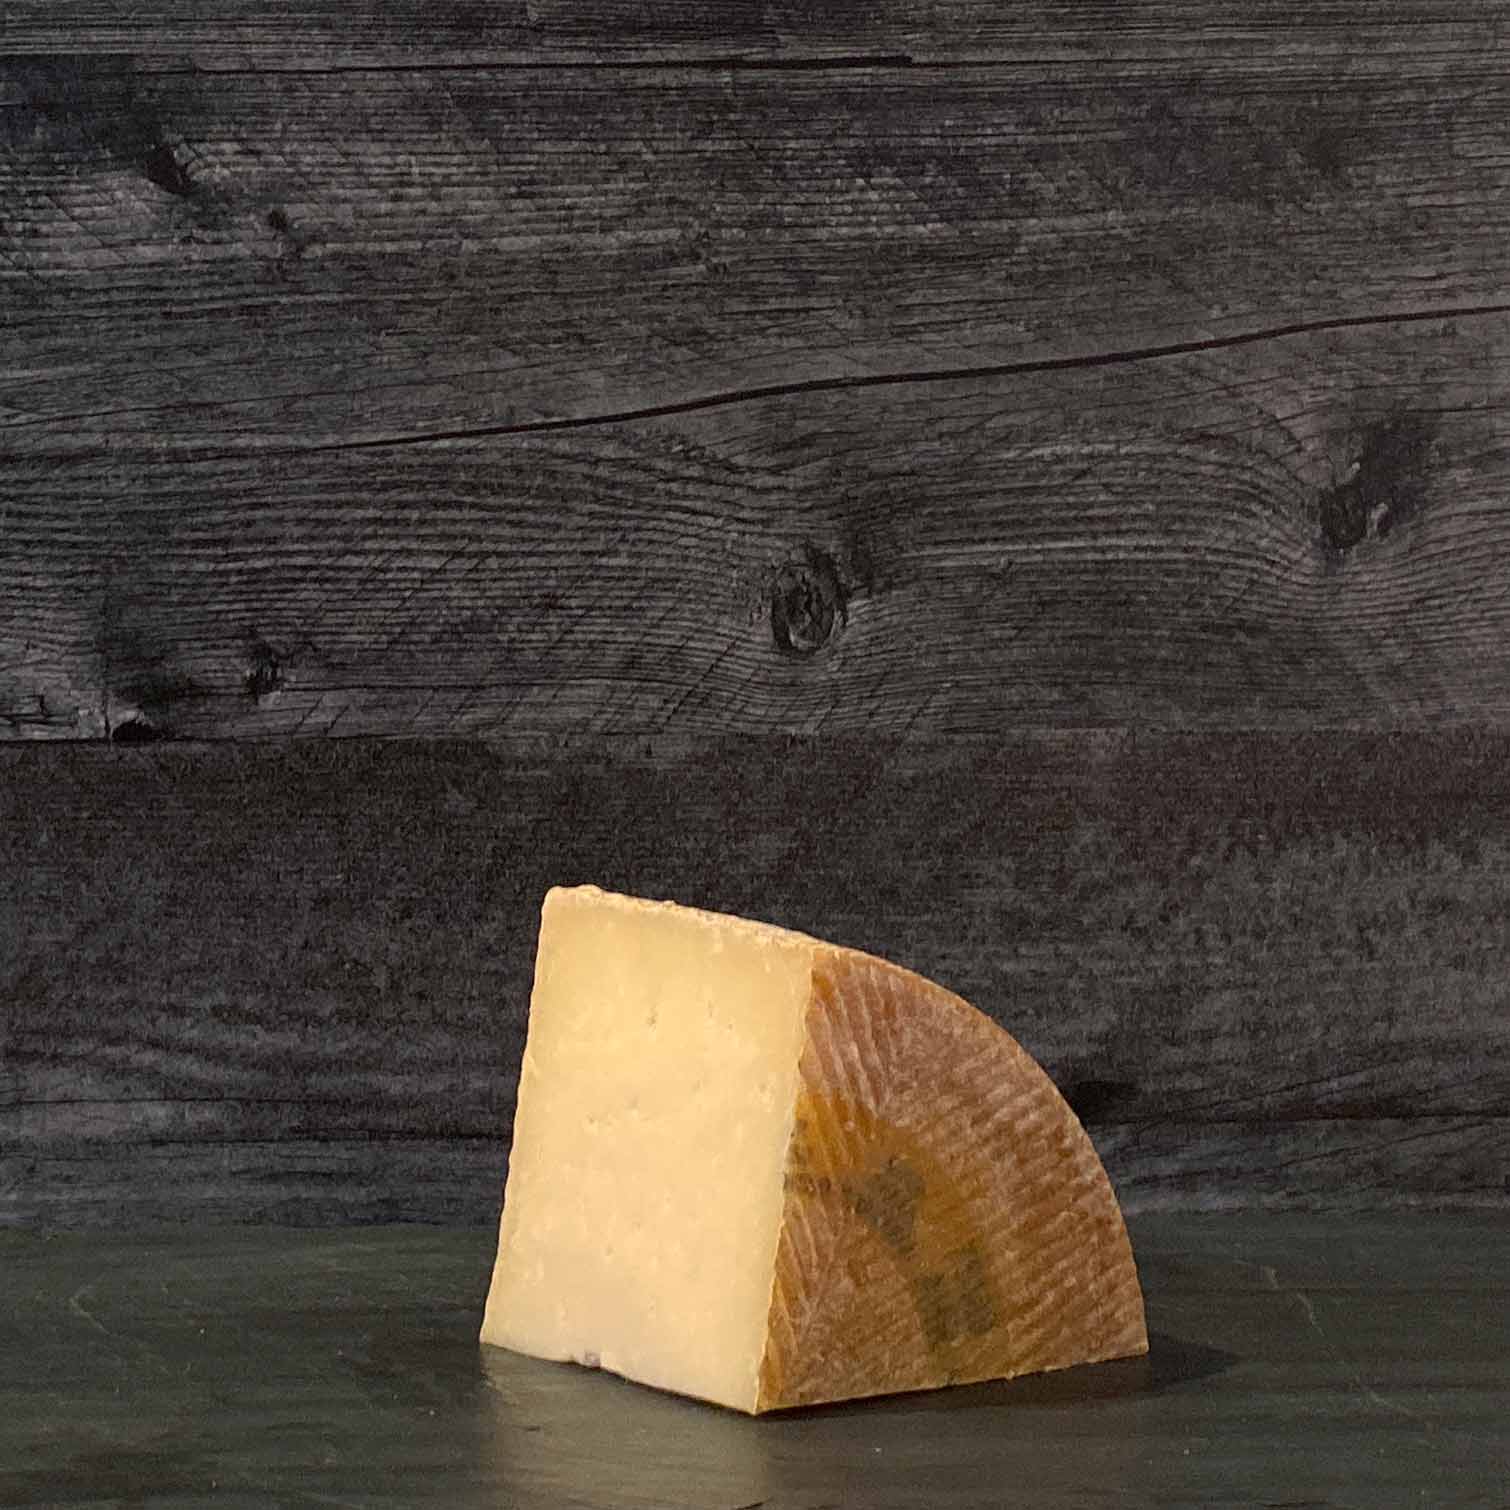 A wedge of Manchego Gran Reserva Cheese on a wooden surface